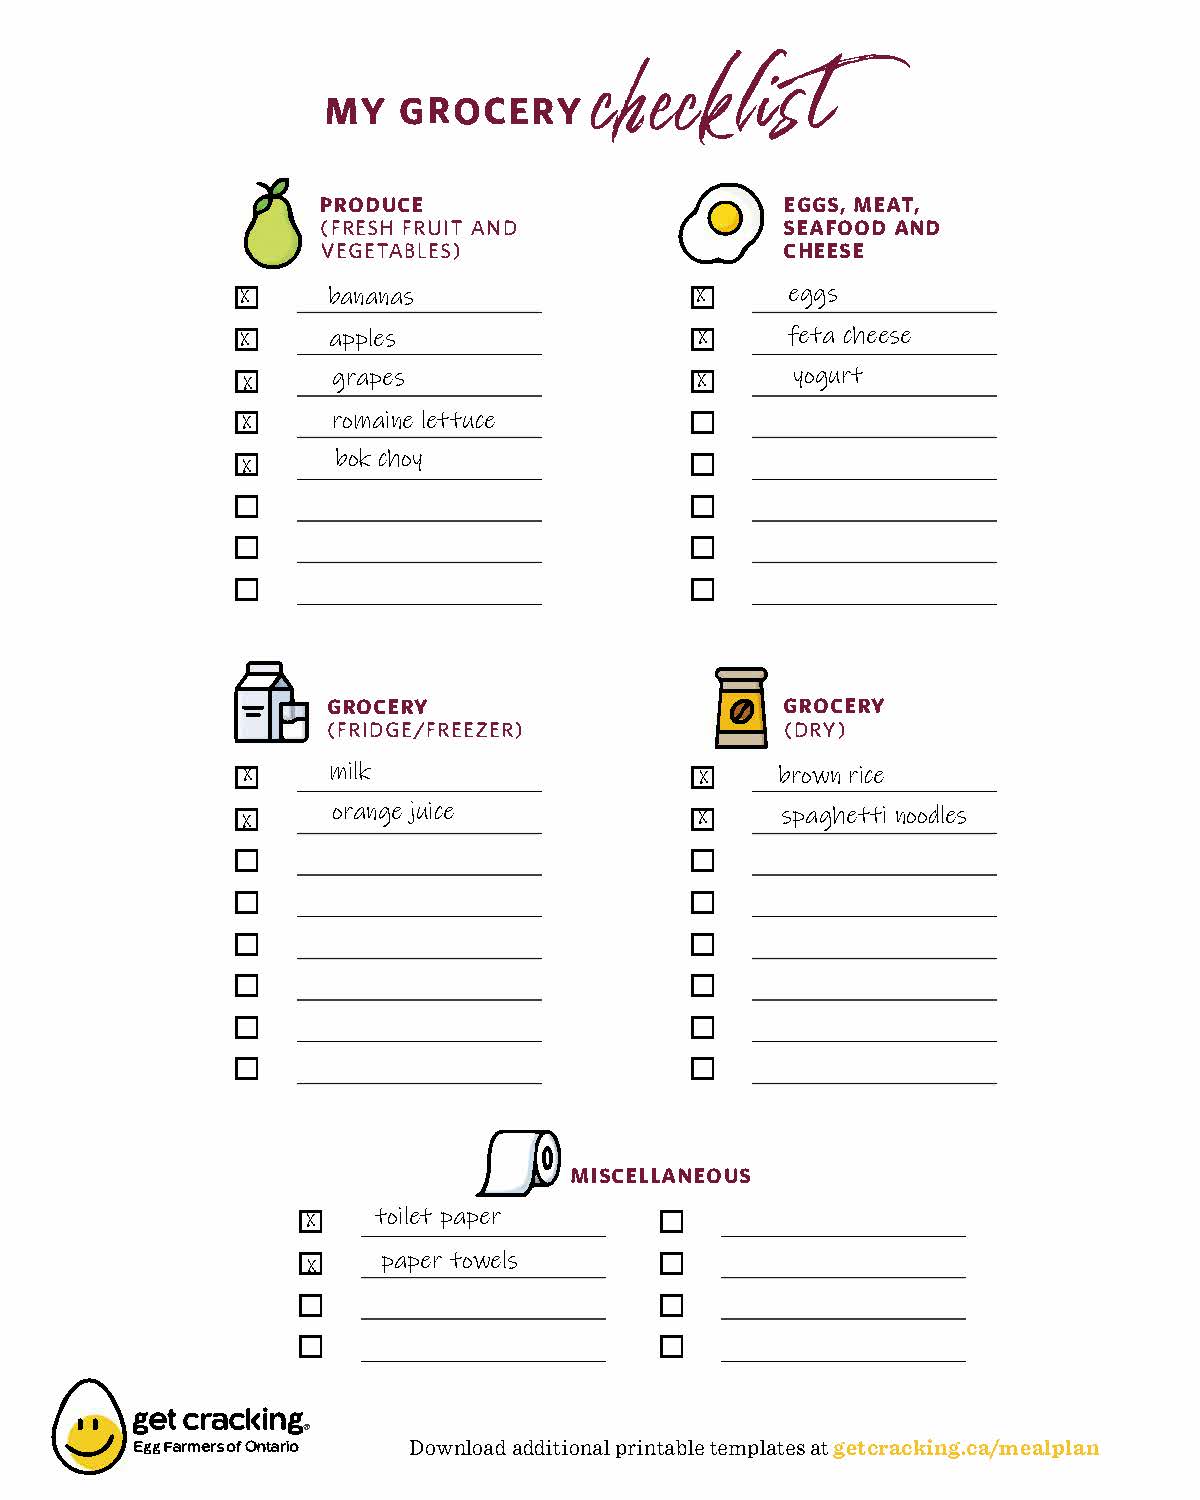 Grocery Checklist template